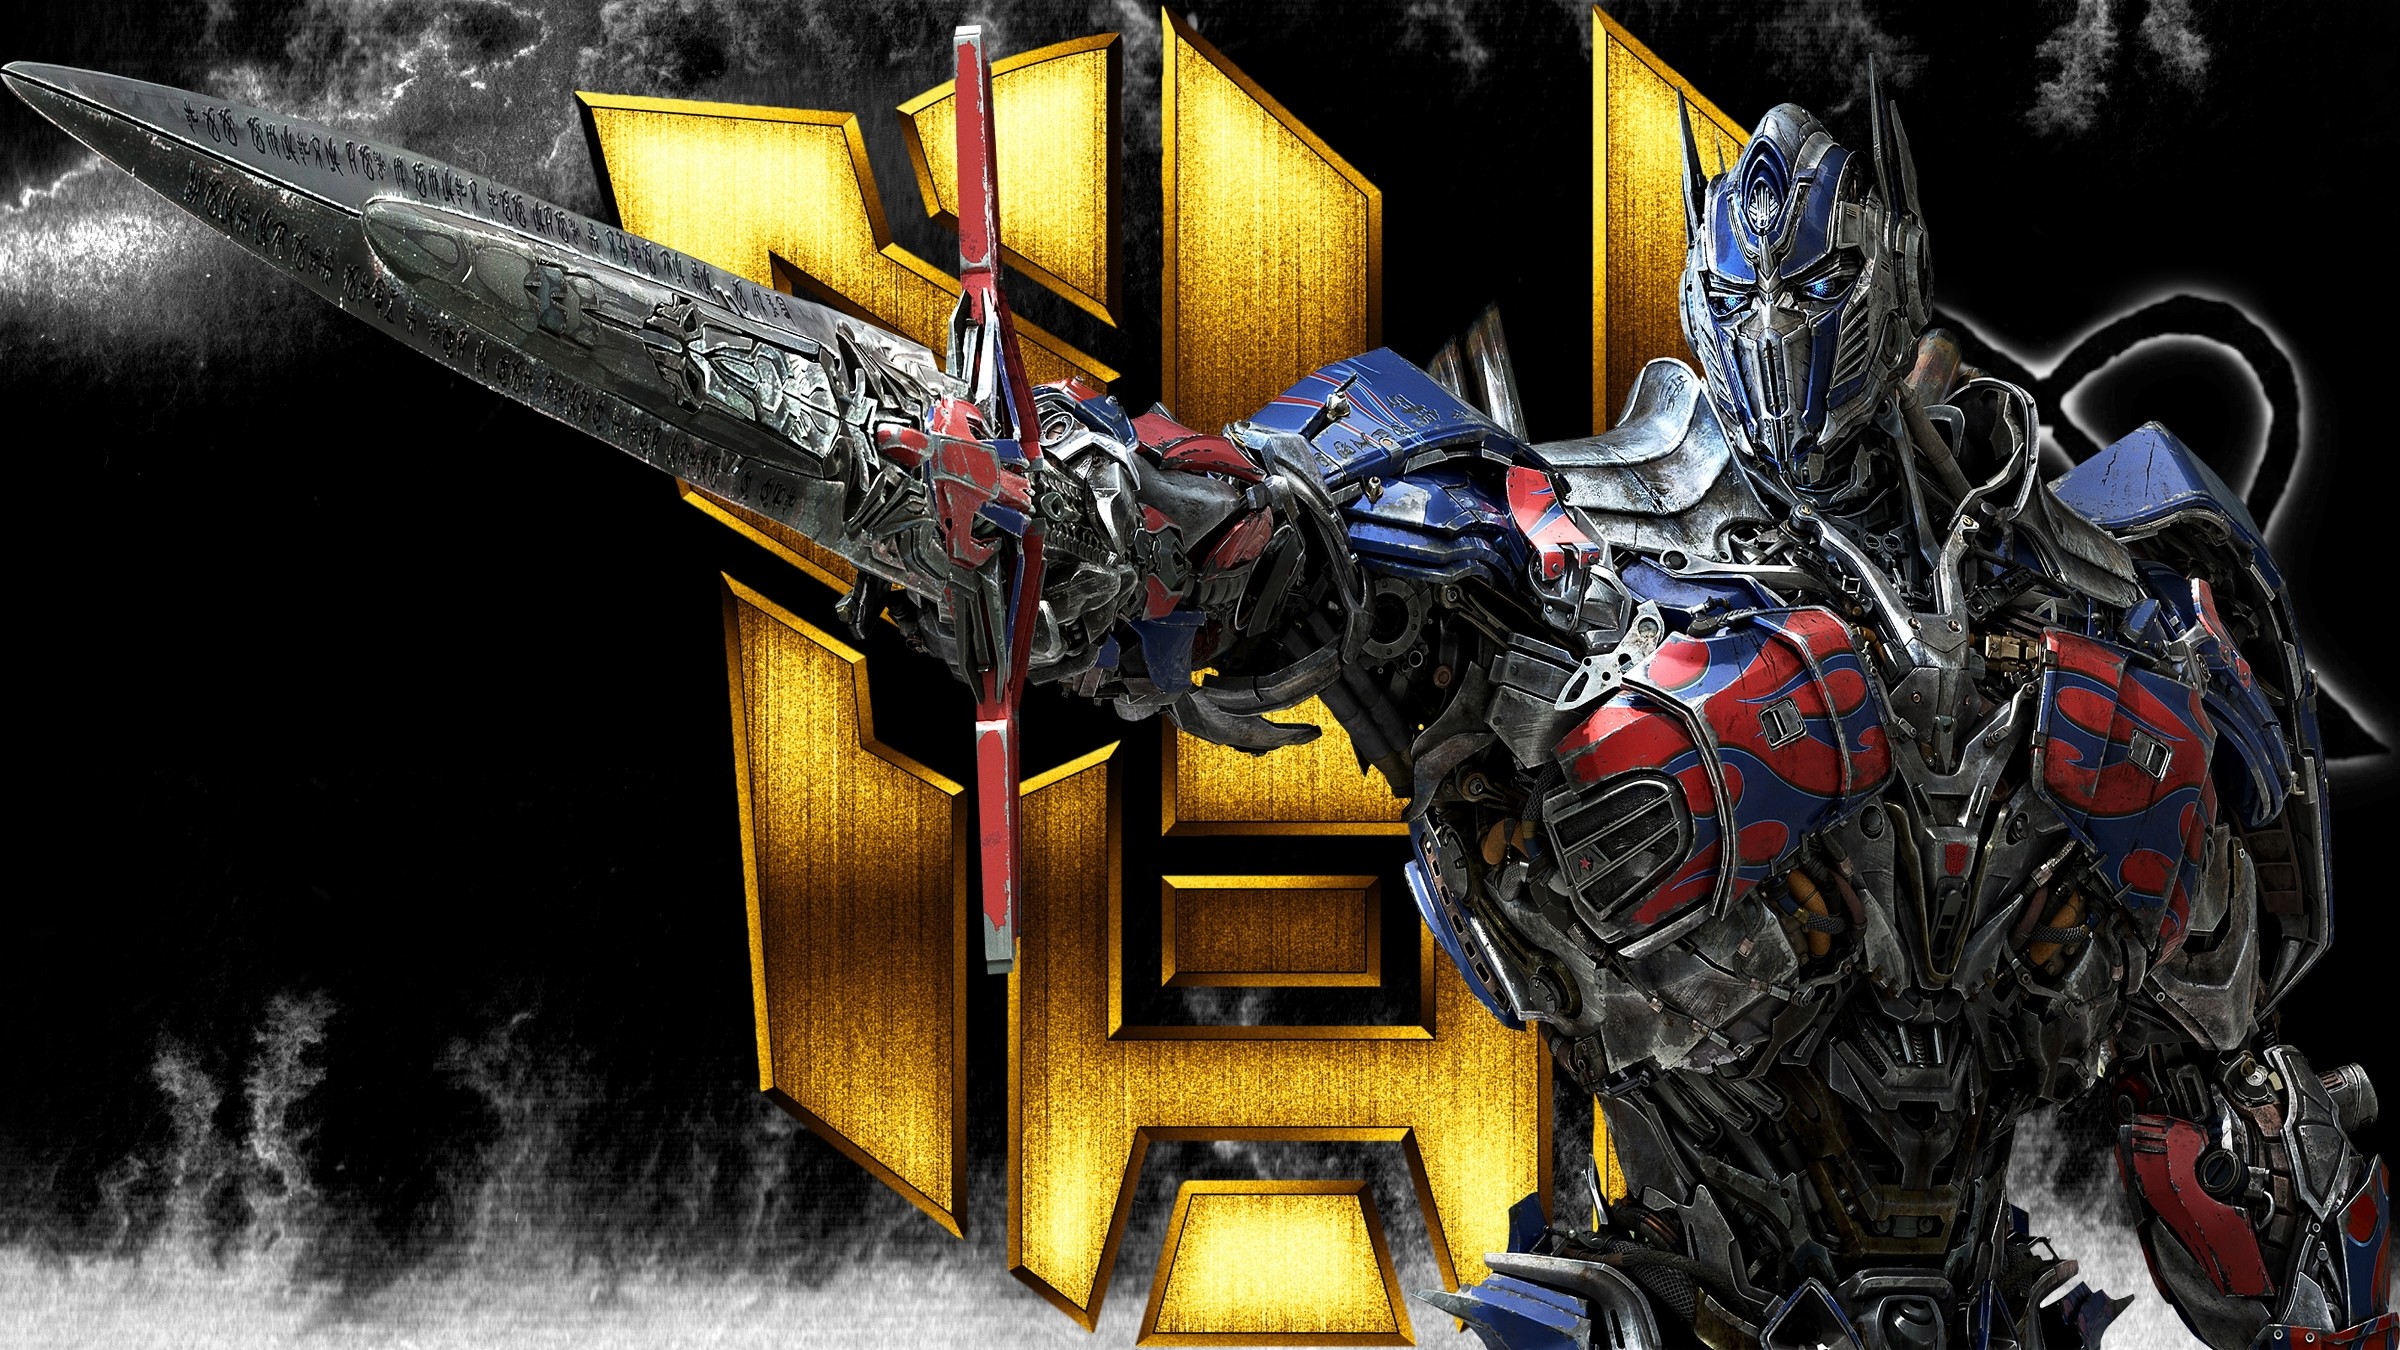 optimus prime hd wallpaper,action adventure game,transformers,fictional character,pc game,fiction